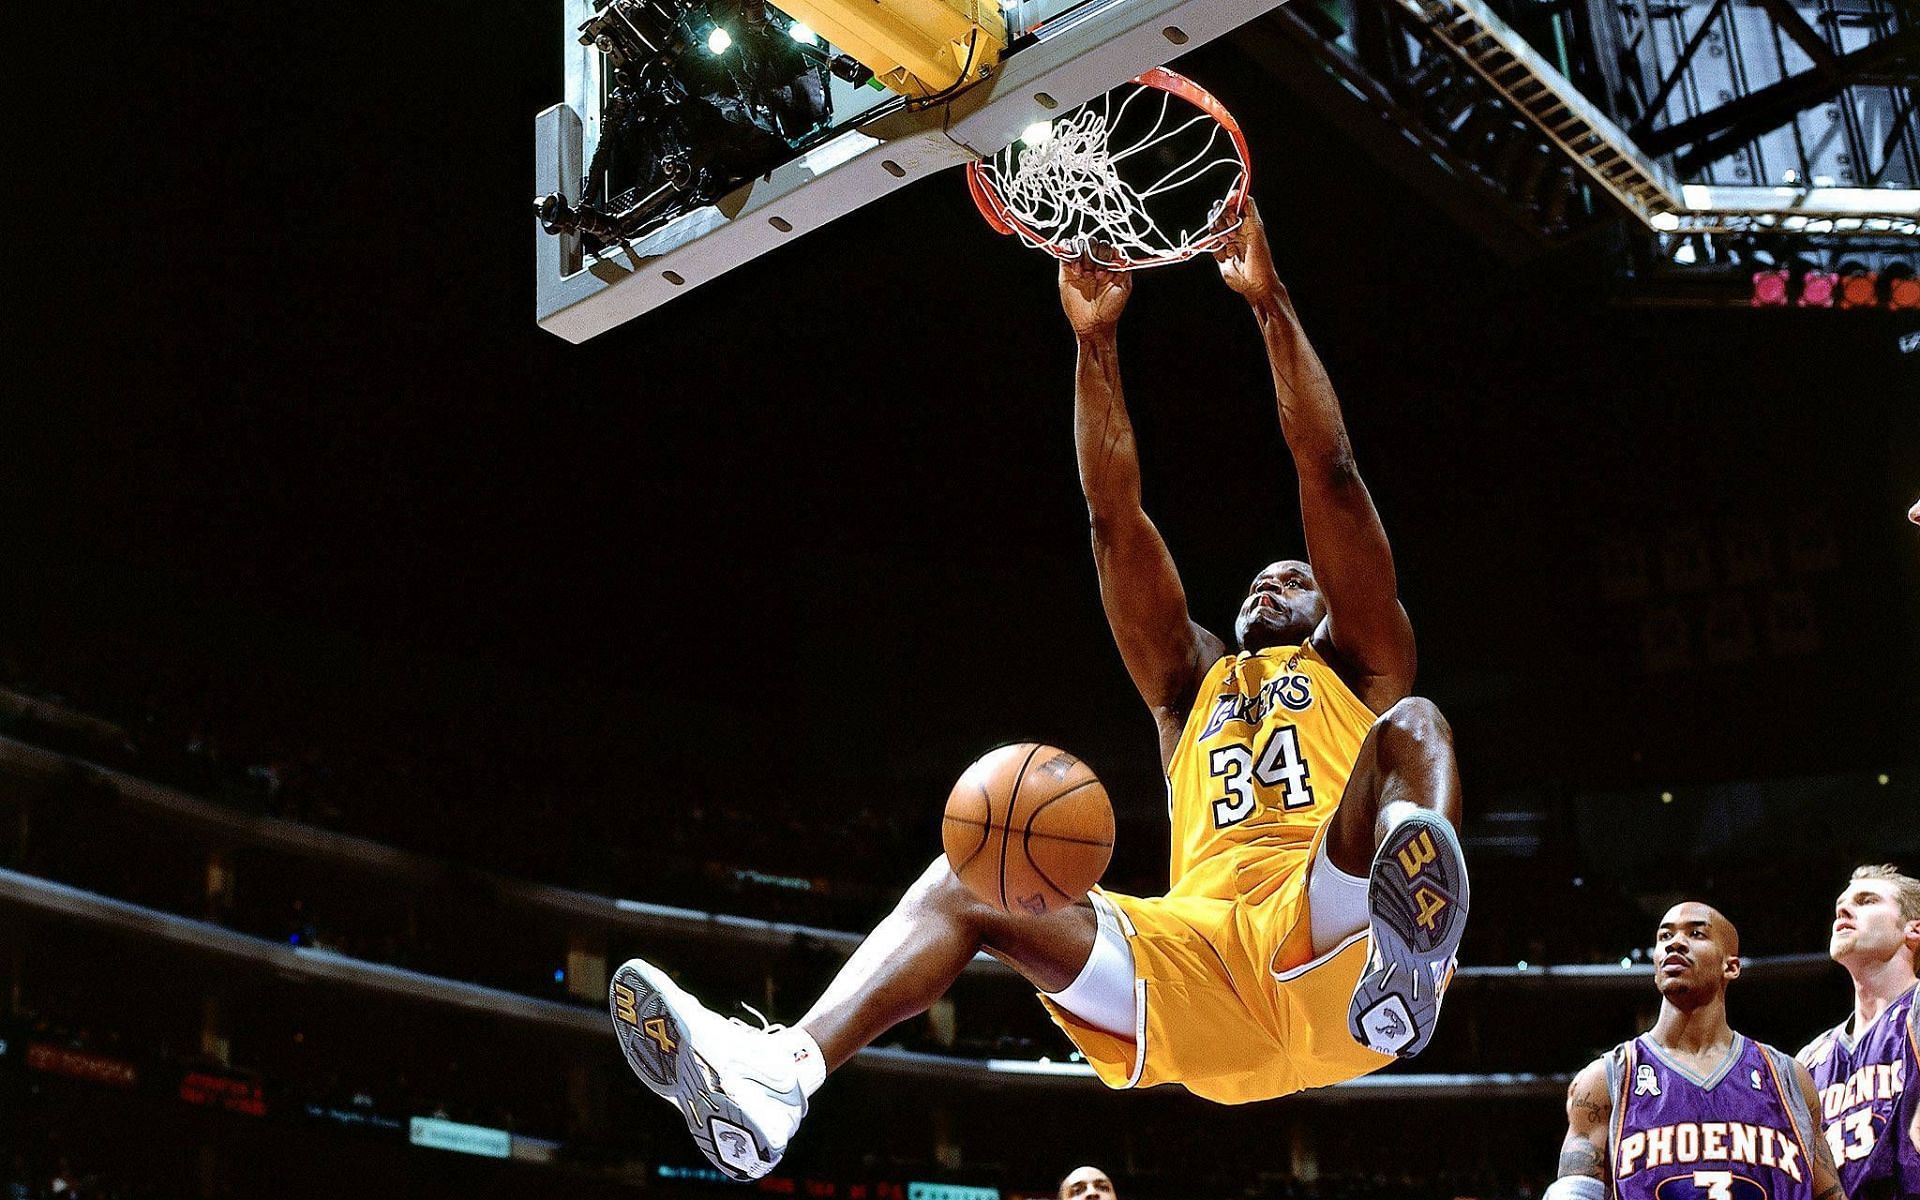 &quot;Shaq&quot; shares the &quot;most dominant&quot; title with Wilt Chamberlain in NBA history.